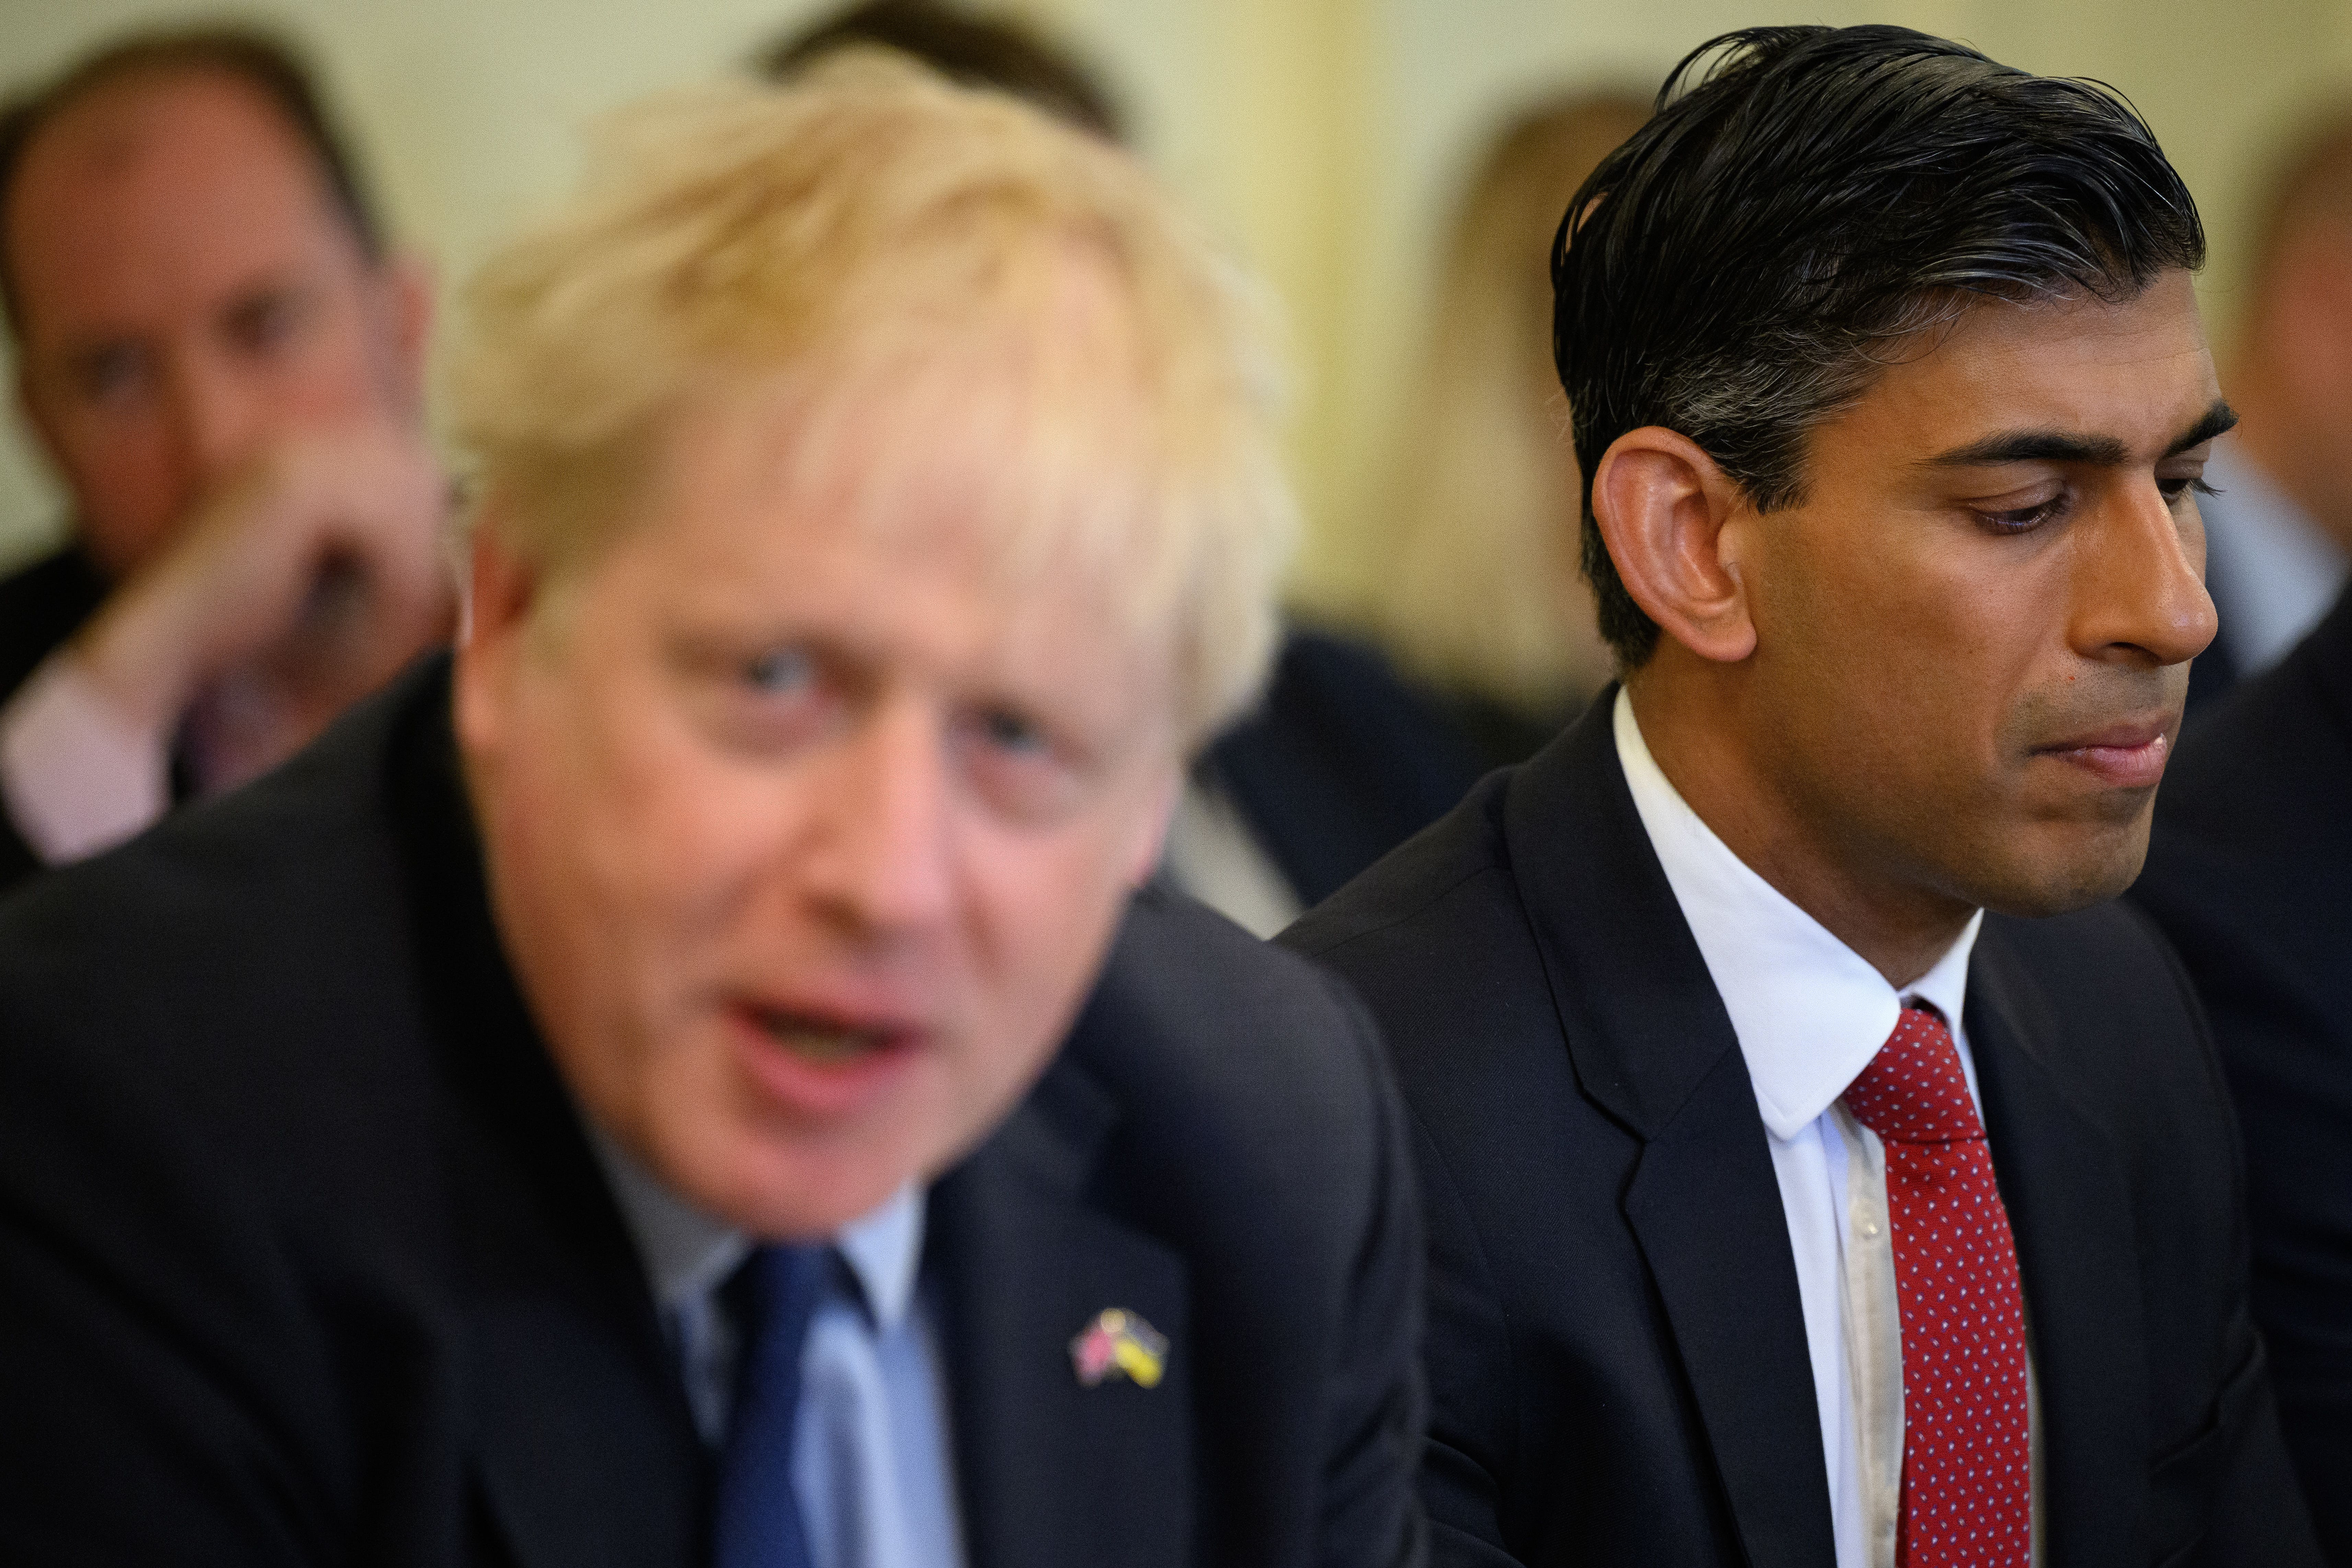 Rishi Sunak has dug into the Tory civil war by accusing Boris Johnson of asking him to take action that ‘wasn’t right’ in discussions of the former prime minister’s honours list